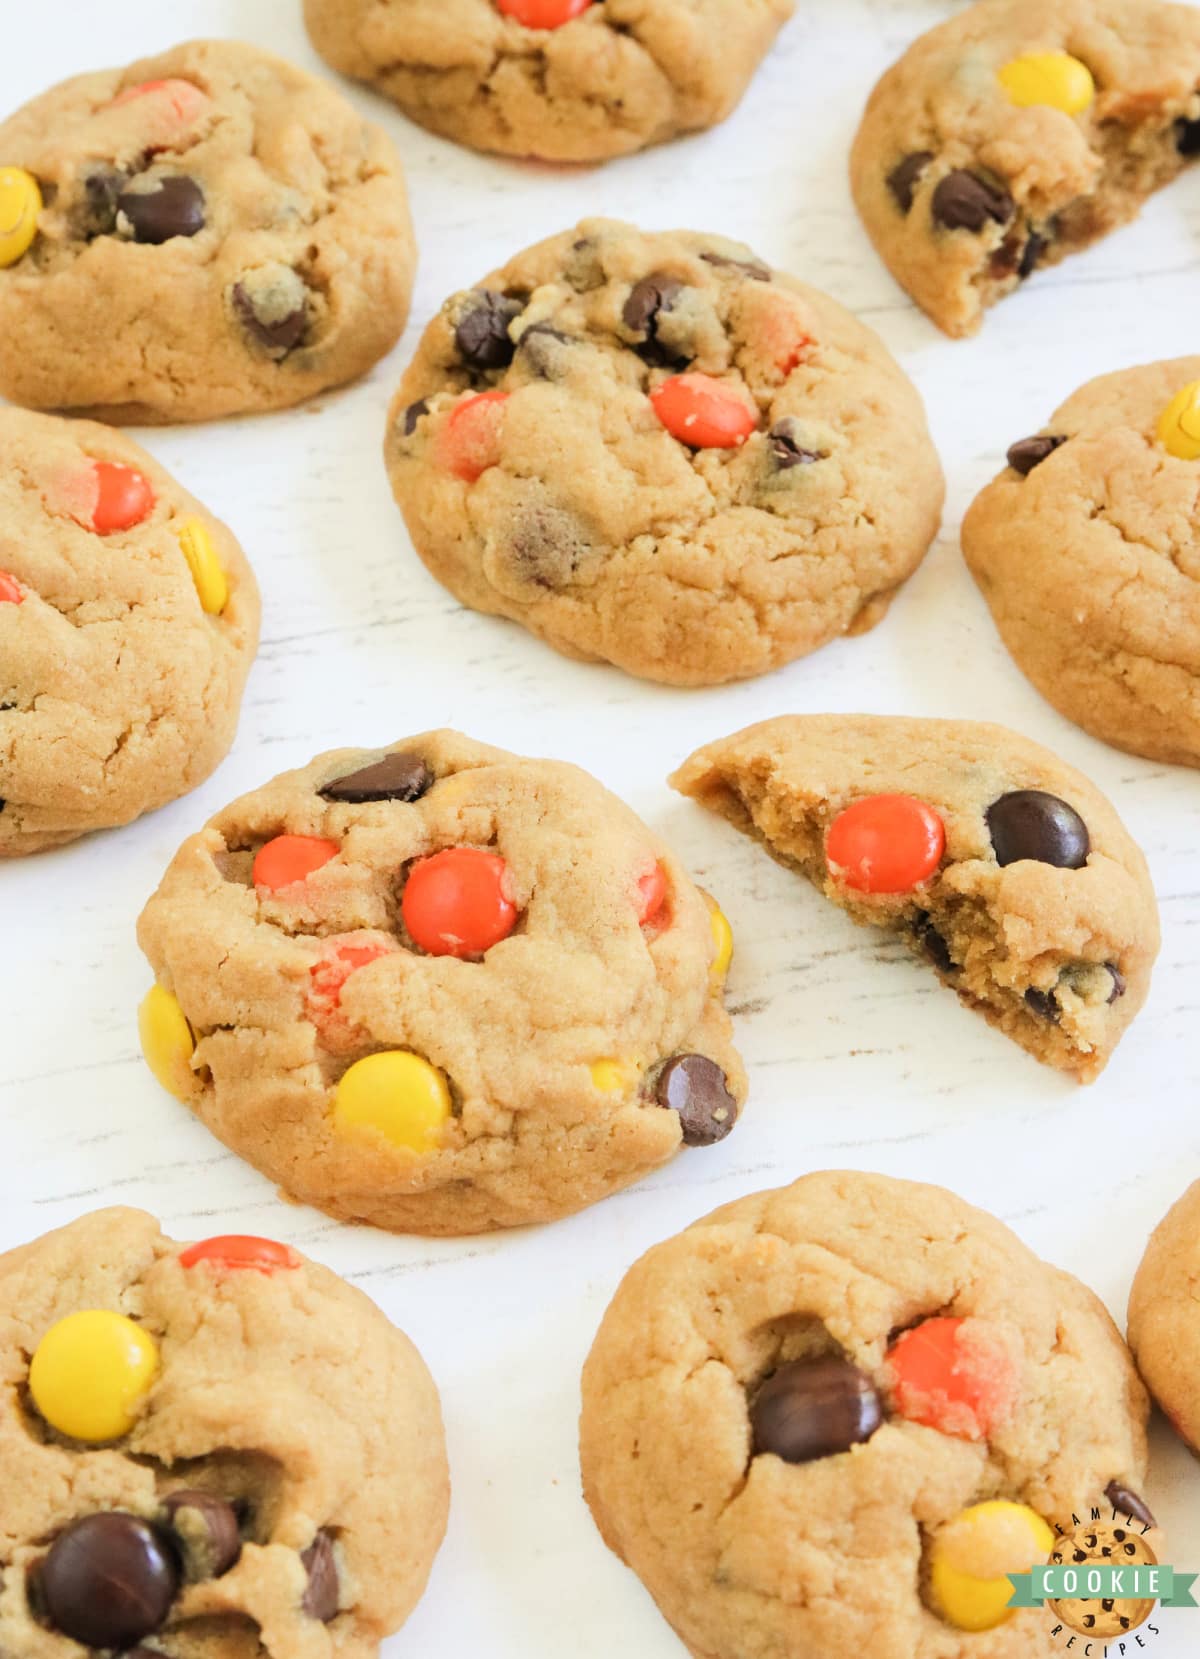 Peanut butter cookies with Reese's pieces